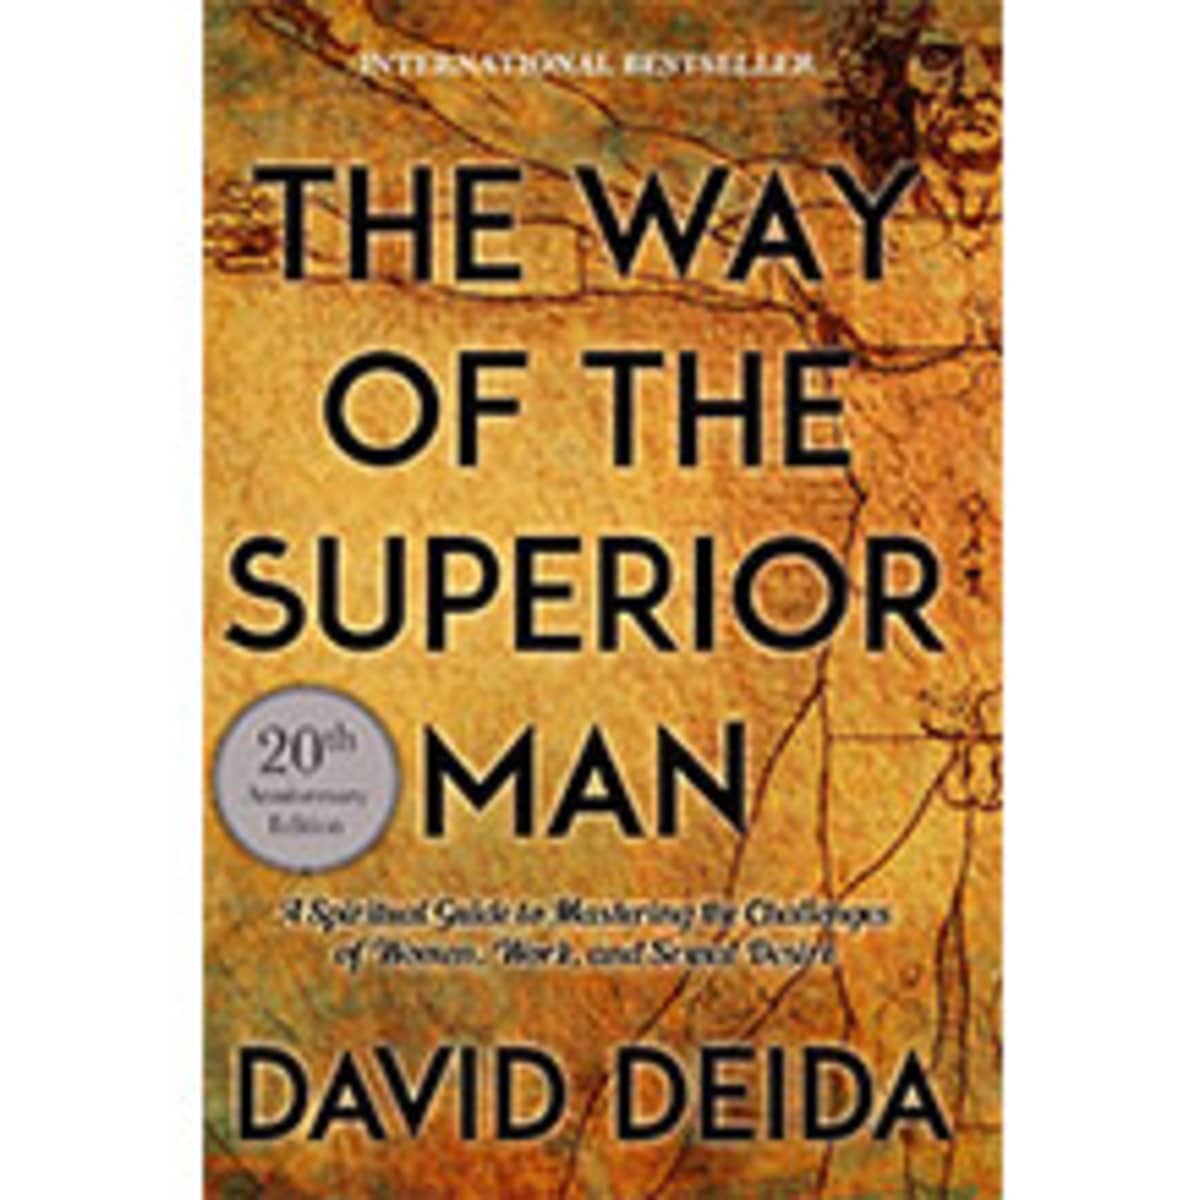 A Workbook for Women based on David Deida's The Way of the Superior Man:  Questions that shed light on life with a Superior Man through Deida's  internationally  Deida's The Way of